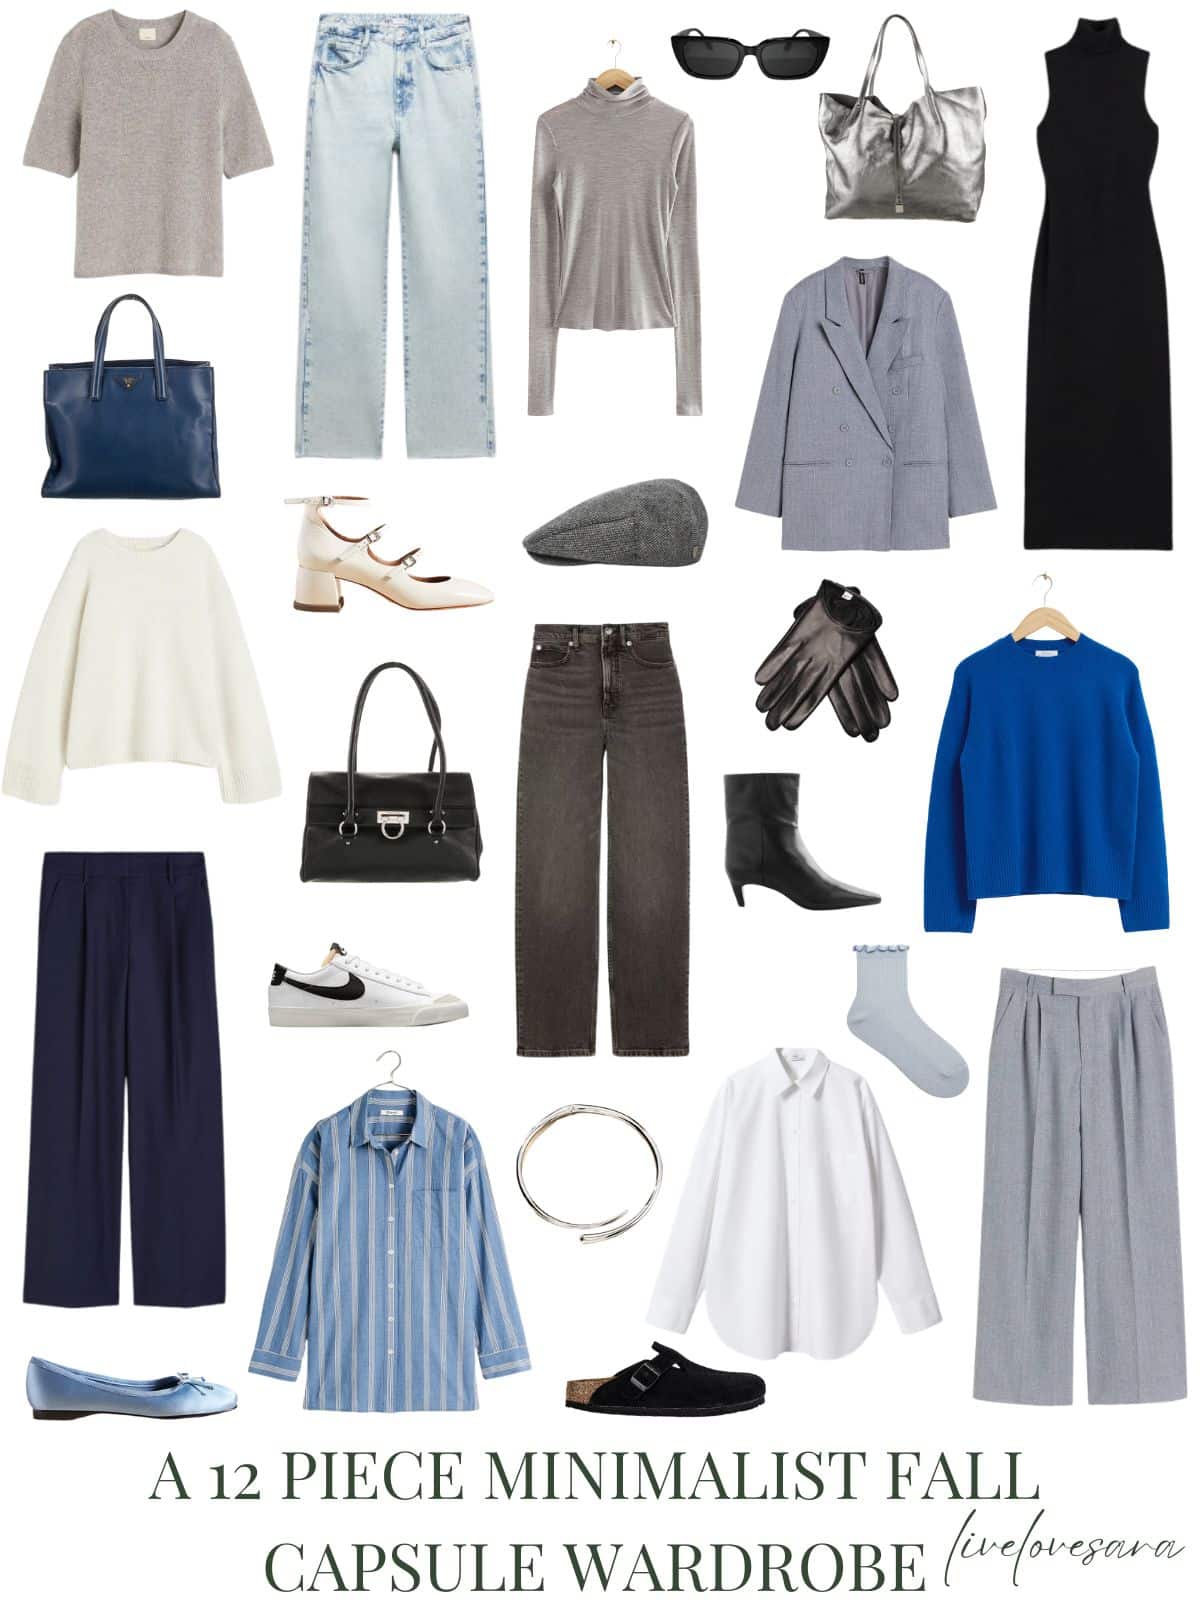 A white background with 12 outfits for a 12 Piece Minimalist Fall Capsule Wardrobe.